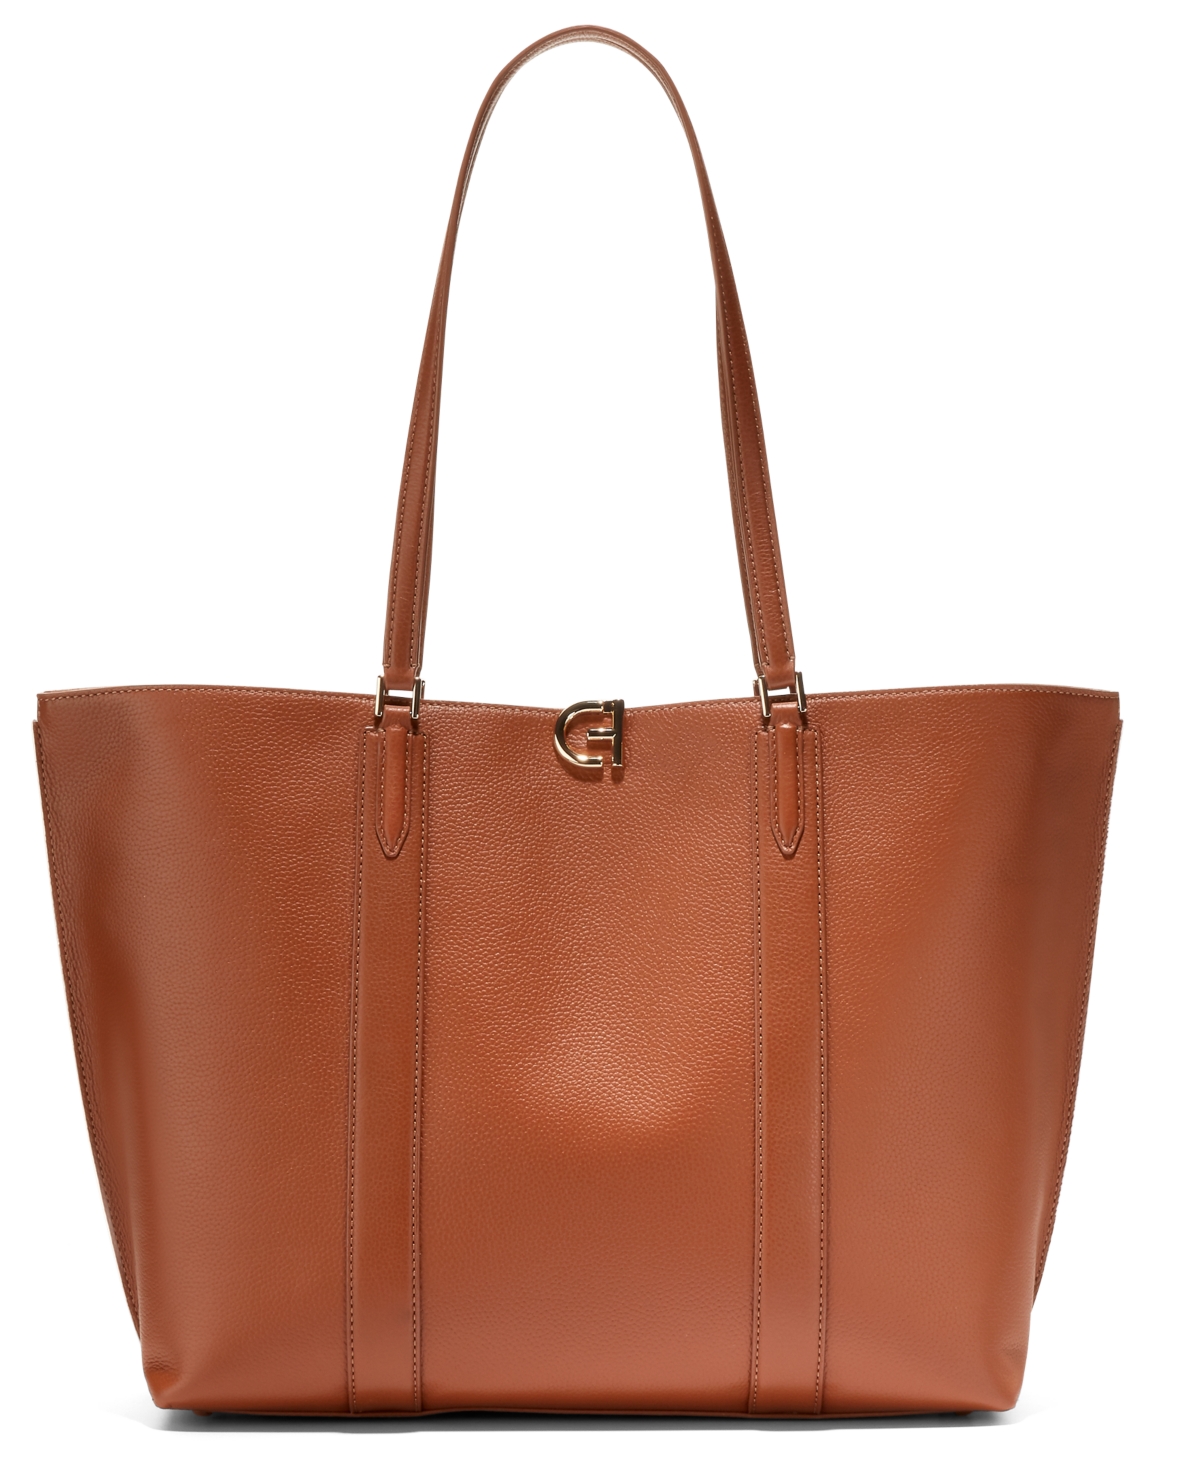 COLE HAAN ESSENTIAL LEATHER TOTE